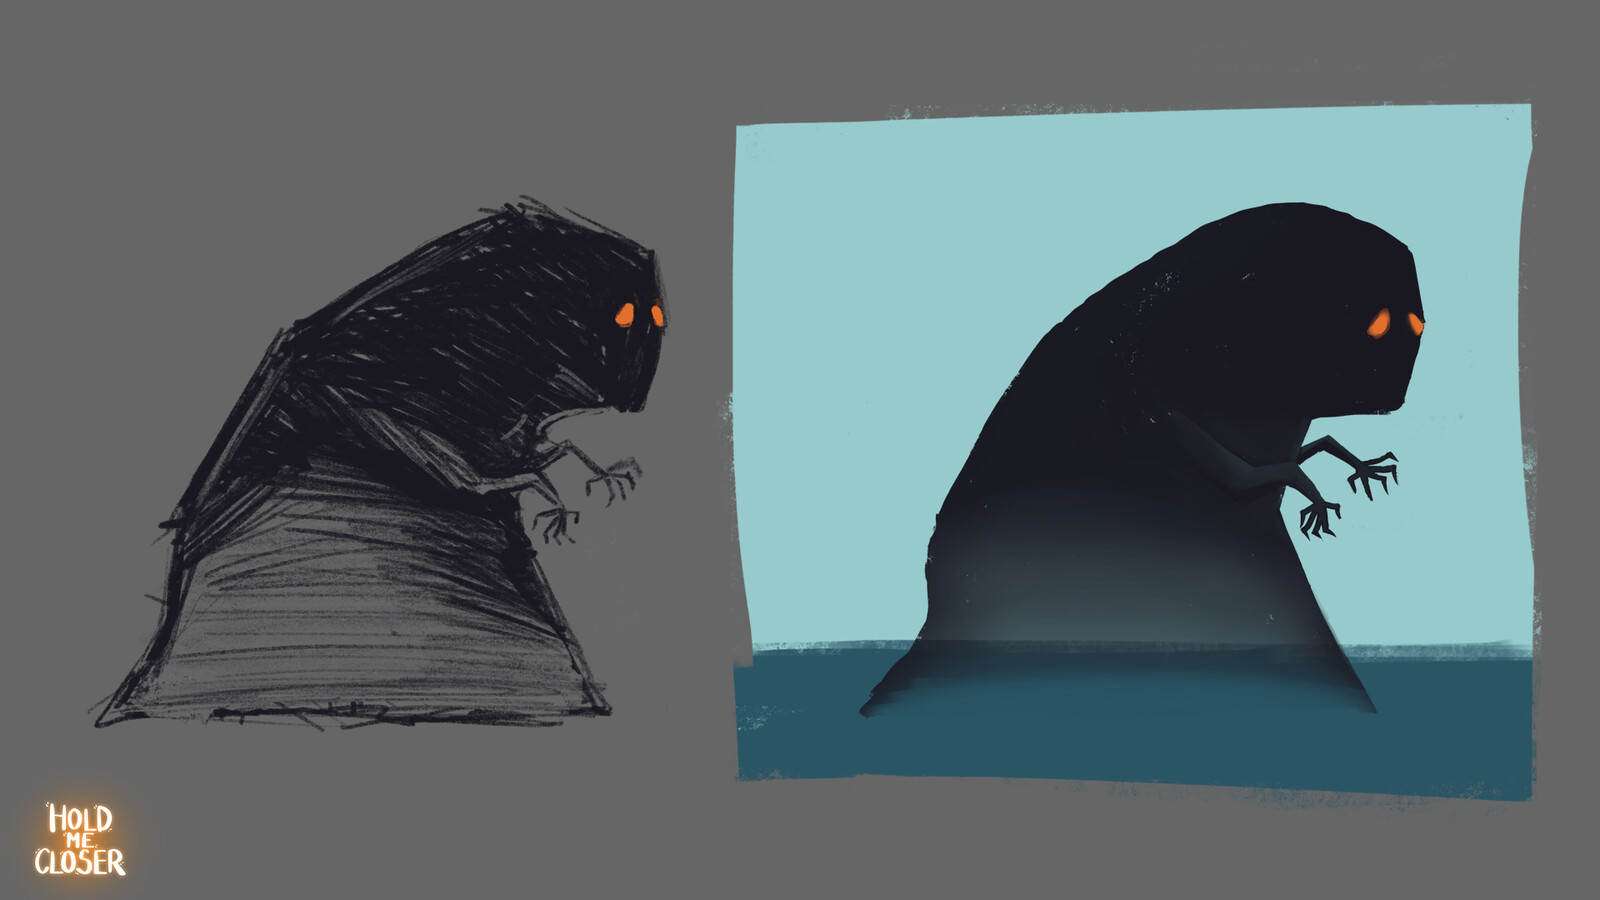 Concept sketches for a creature called "Grief Monster".